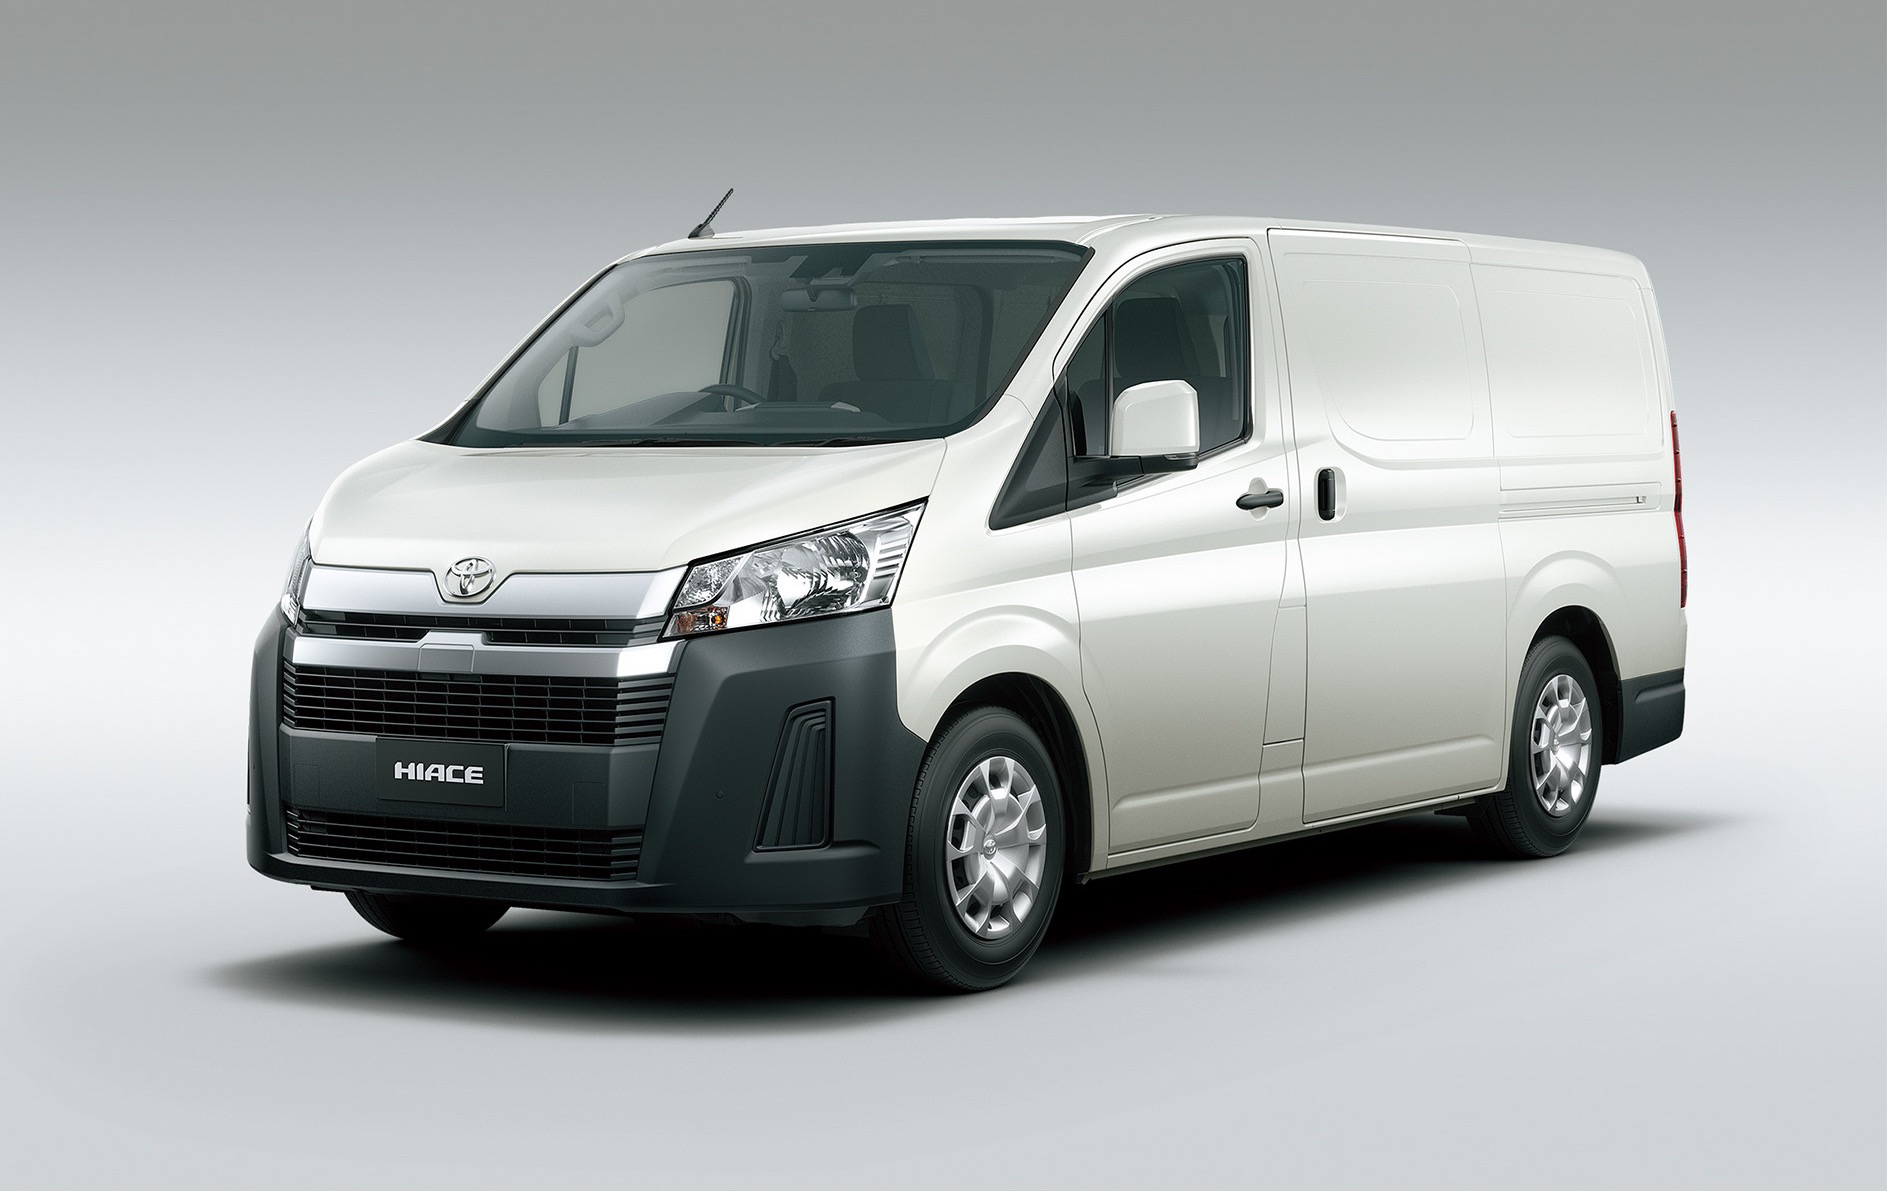 2020 Toyota HiAce on sale in Australia midyear, from 38,640